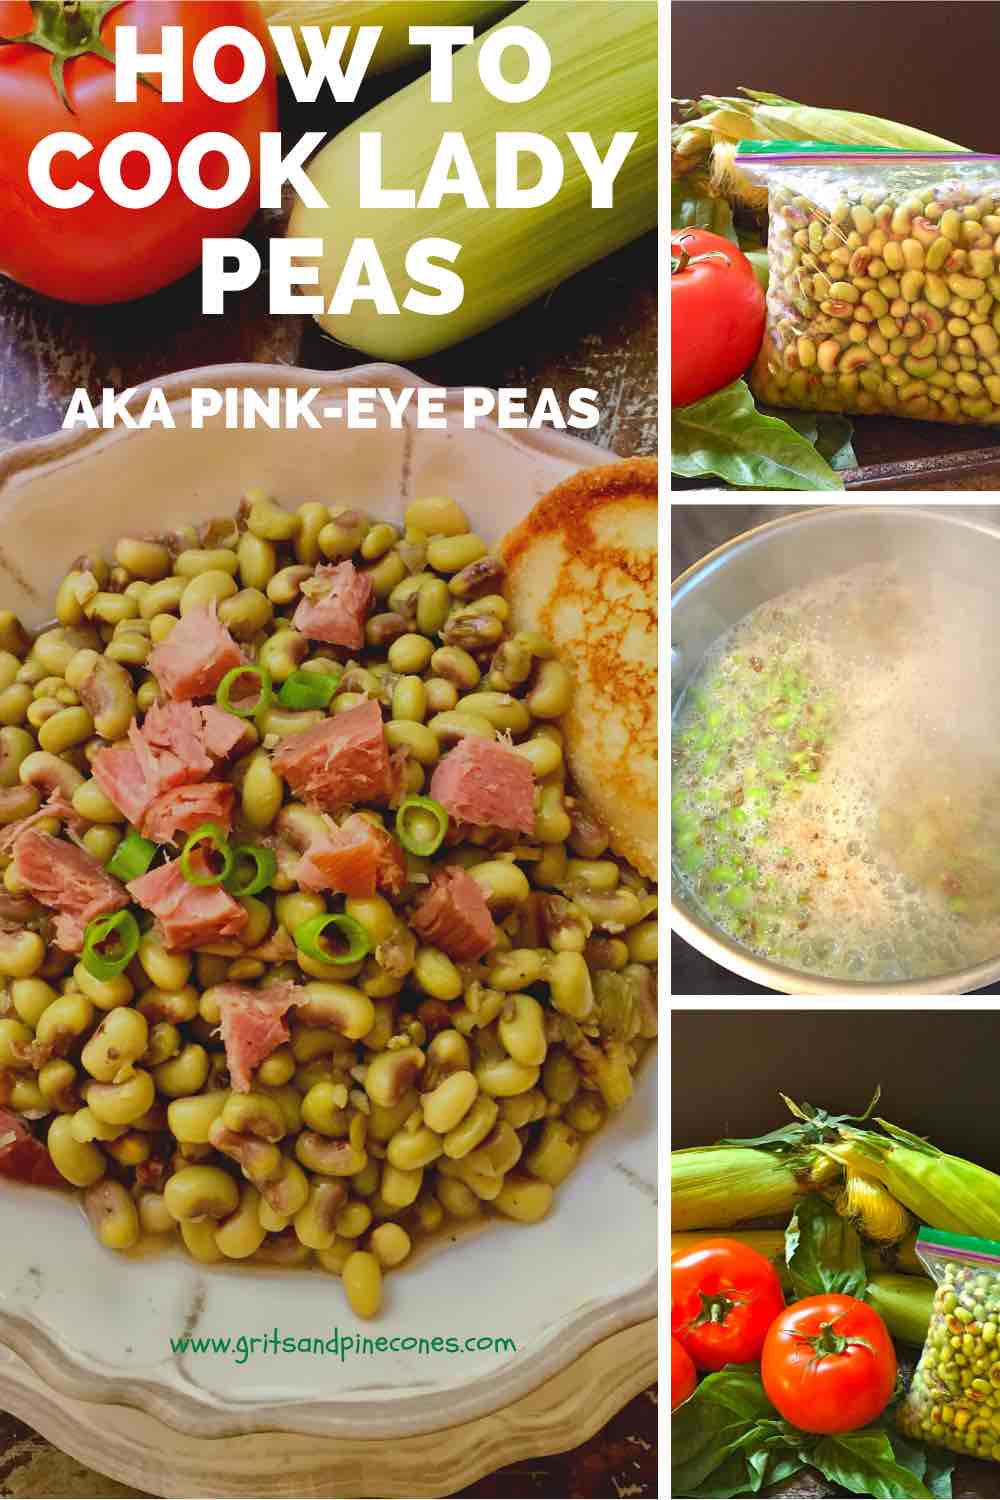 Southern Pink Lady Peas Recipe | gritsandpinecones.com